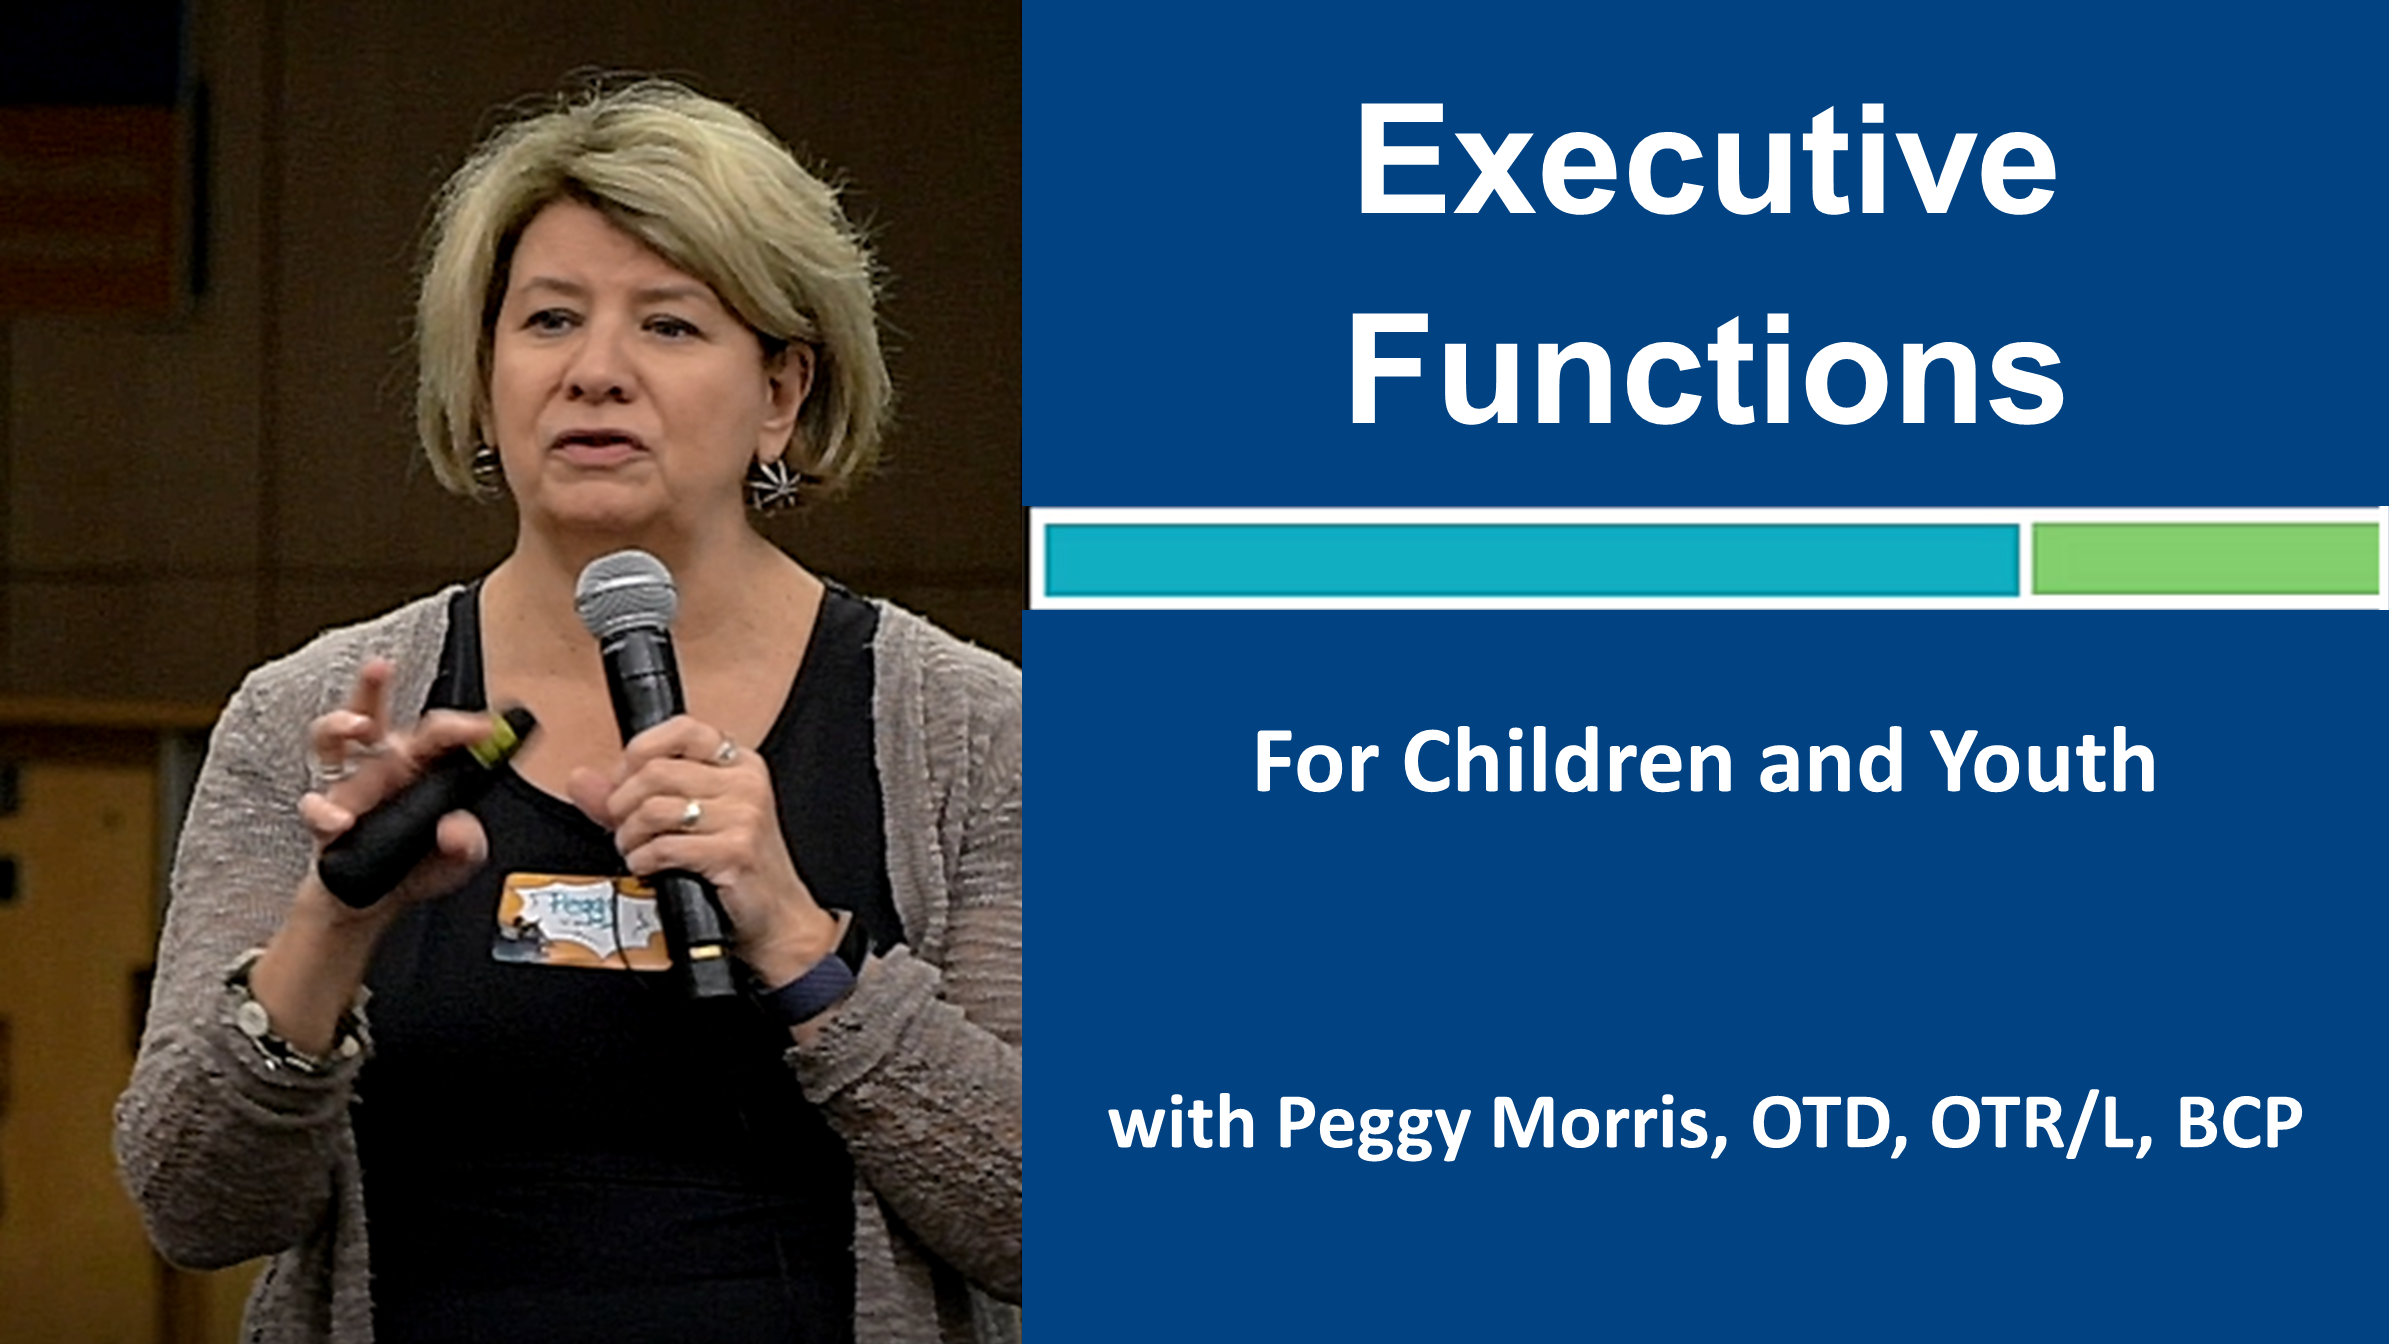 Webinar 5: Executive Functions for Children and Youth with Peggy Morris, OTD, OTR/L, BCP